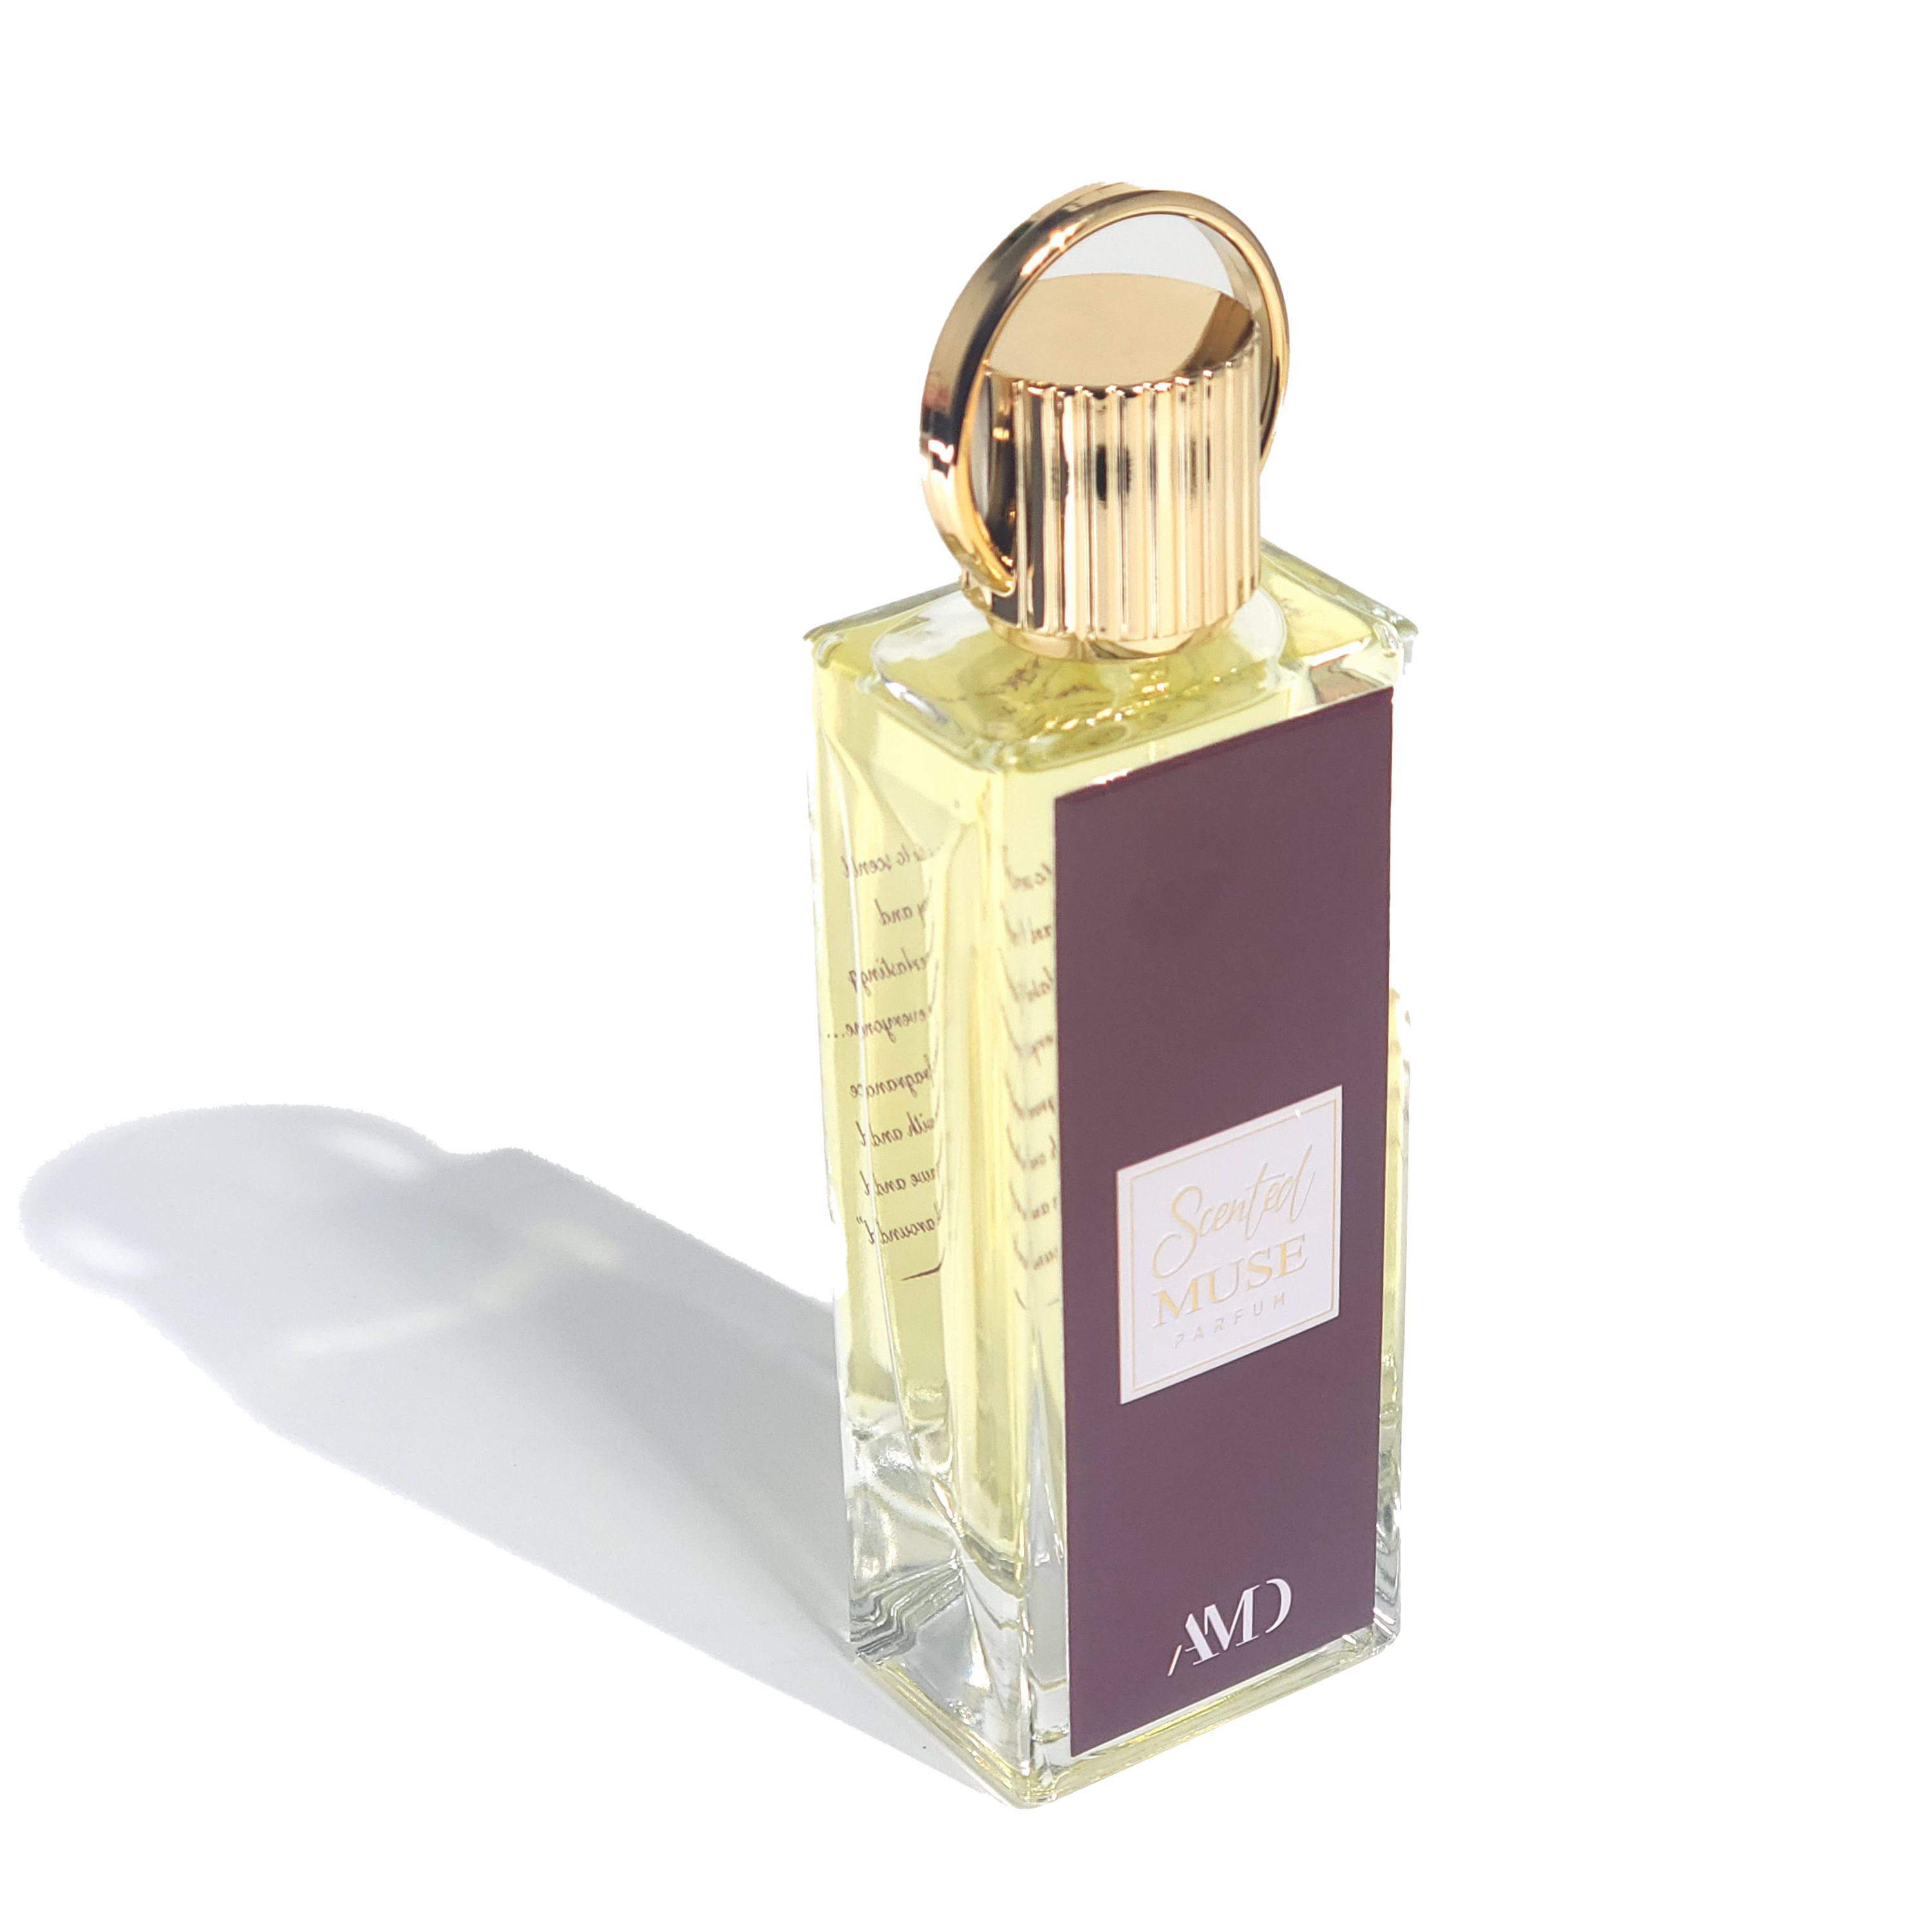 SCENTED MUSE - AMD PERFUMES